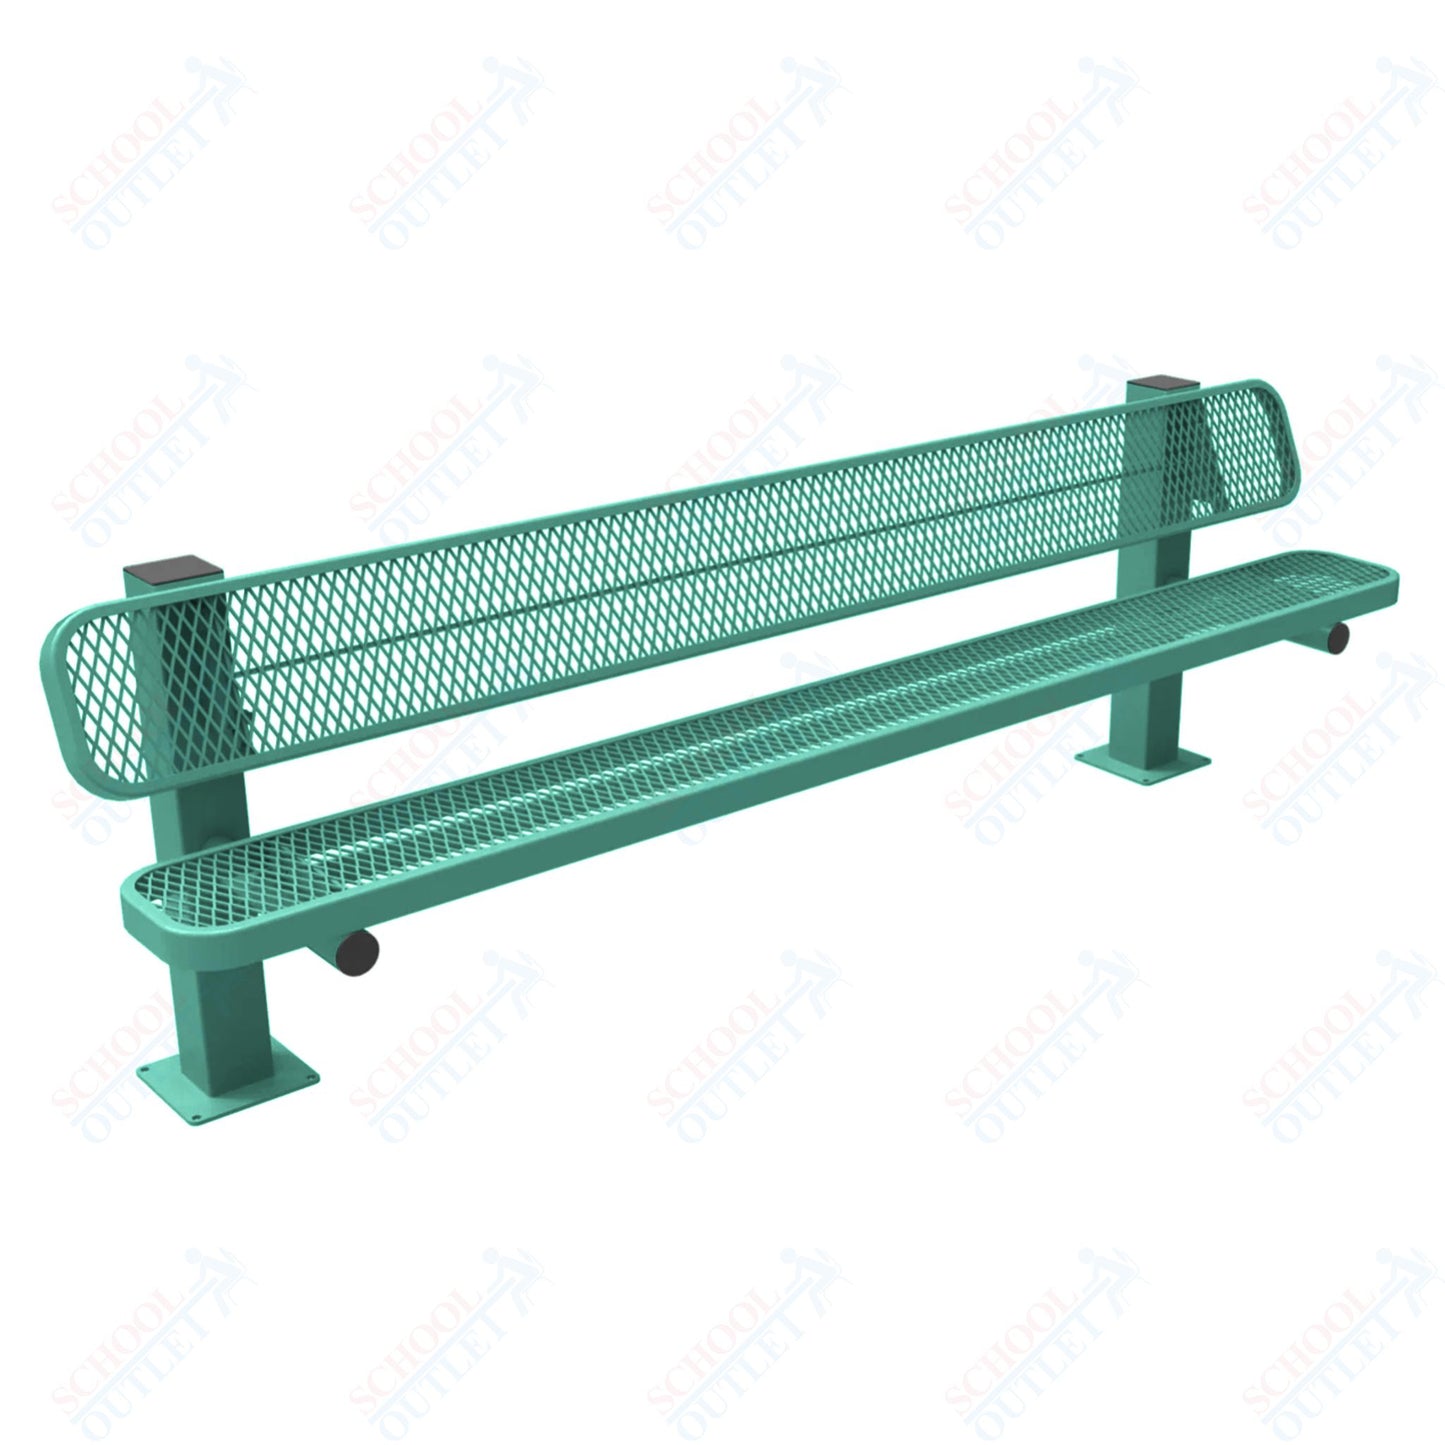 MyTcoat - Single Pedstal Outdoor Bench with Back - Surface Mount 8' L (MYT-BRT08-62)